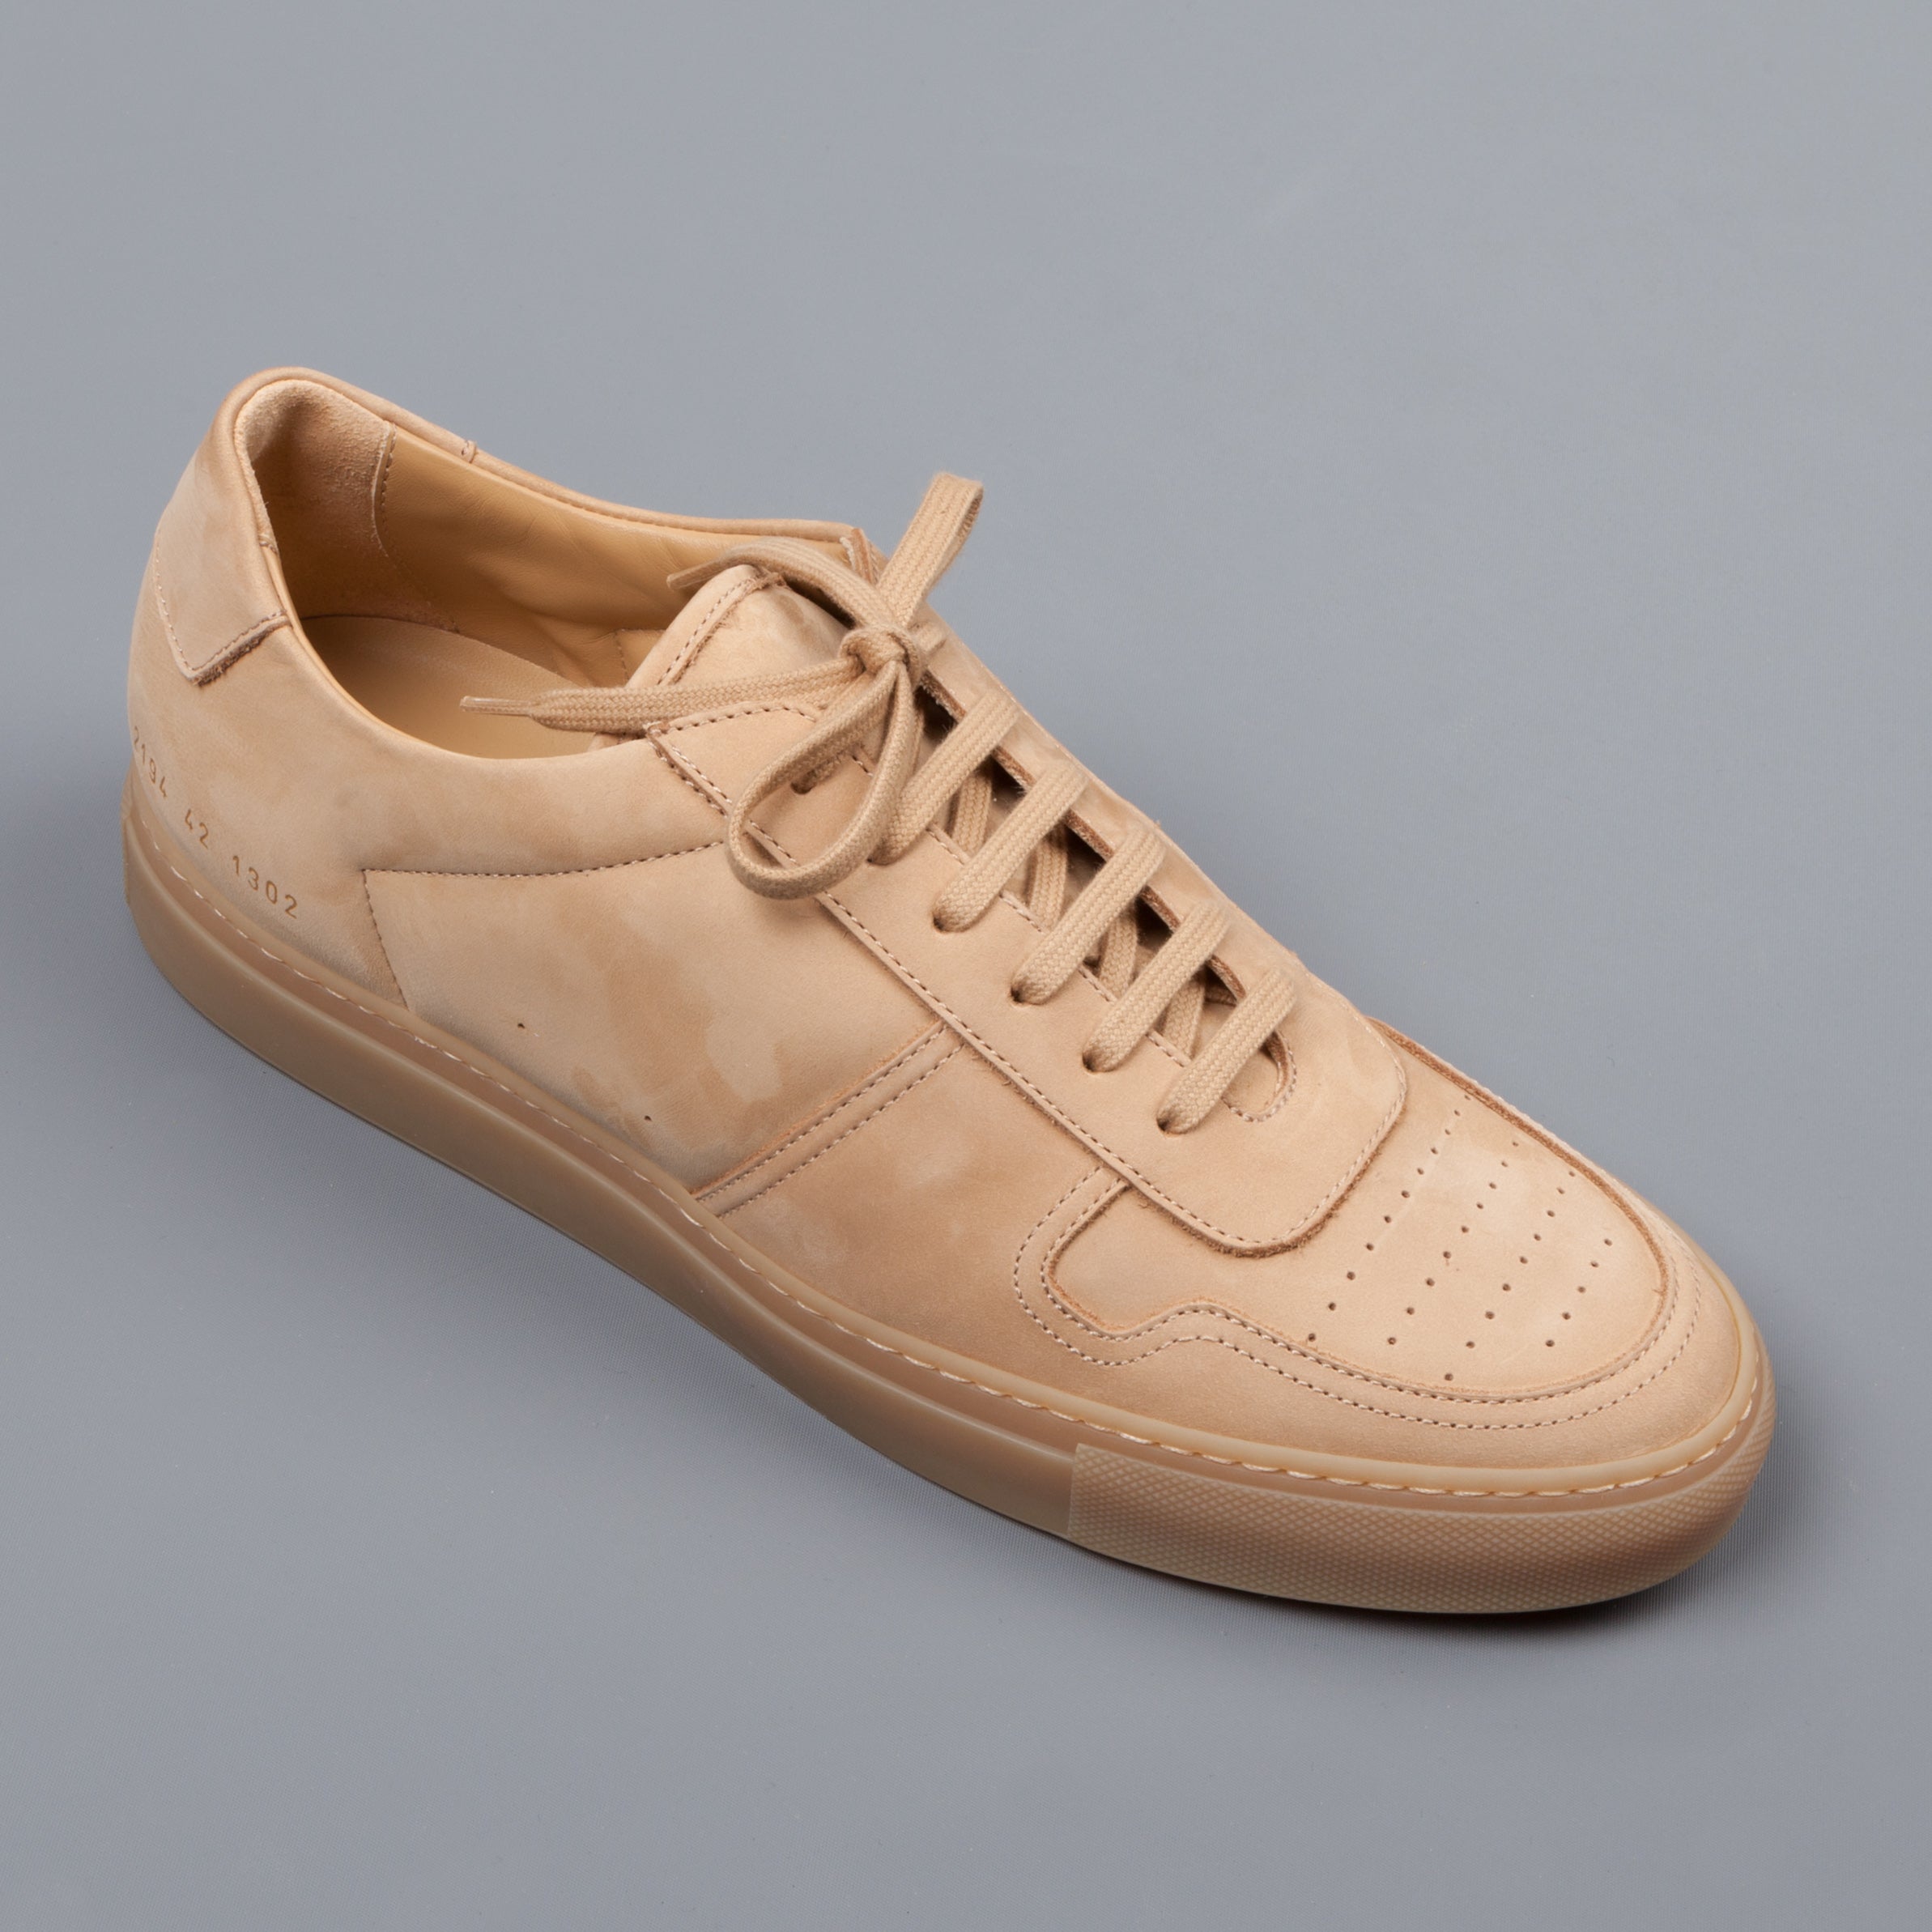 Common Projects Bball Nabuck Tan